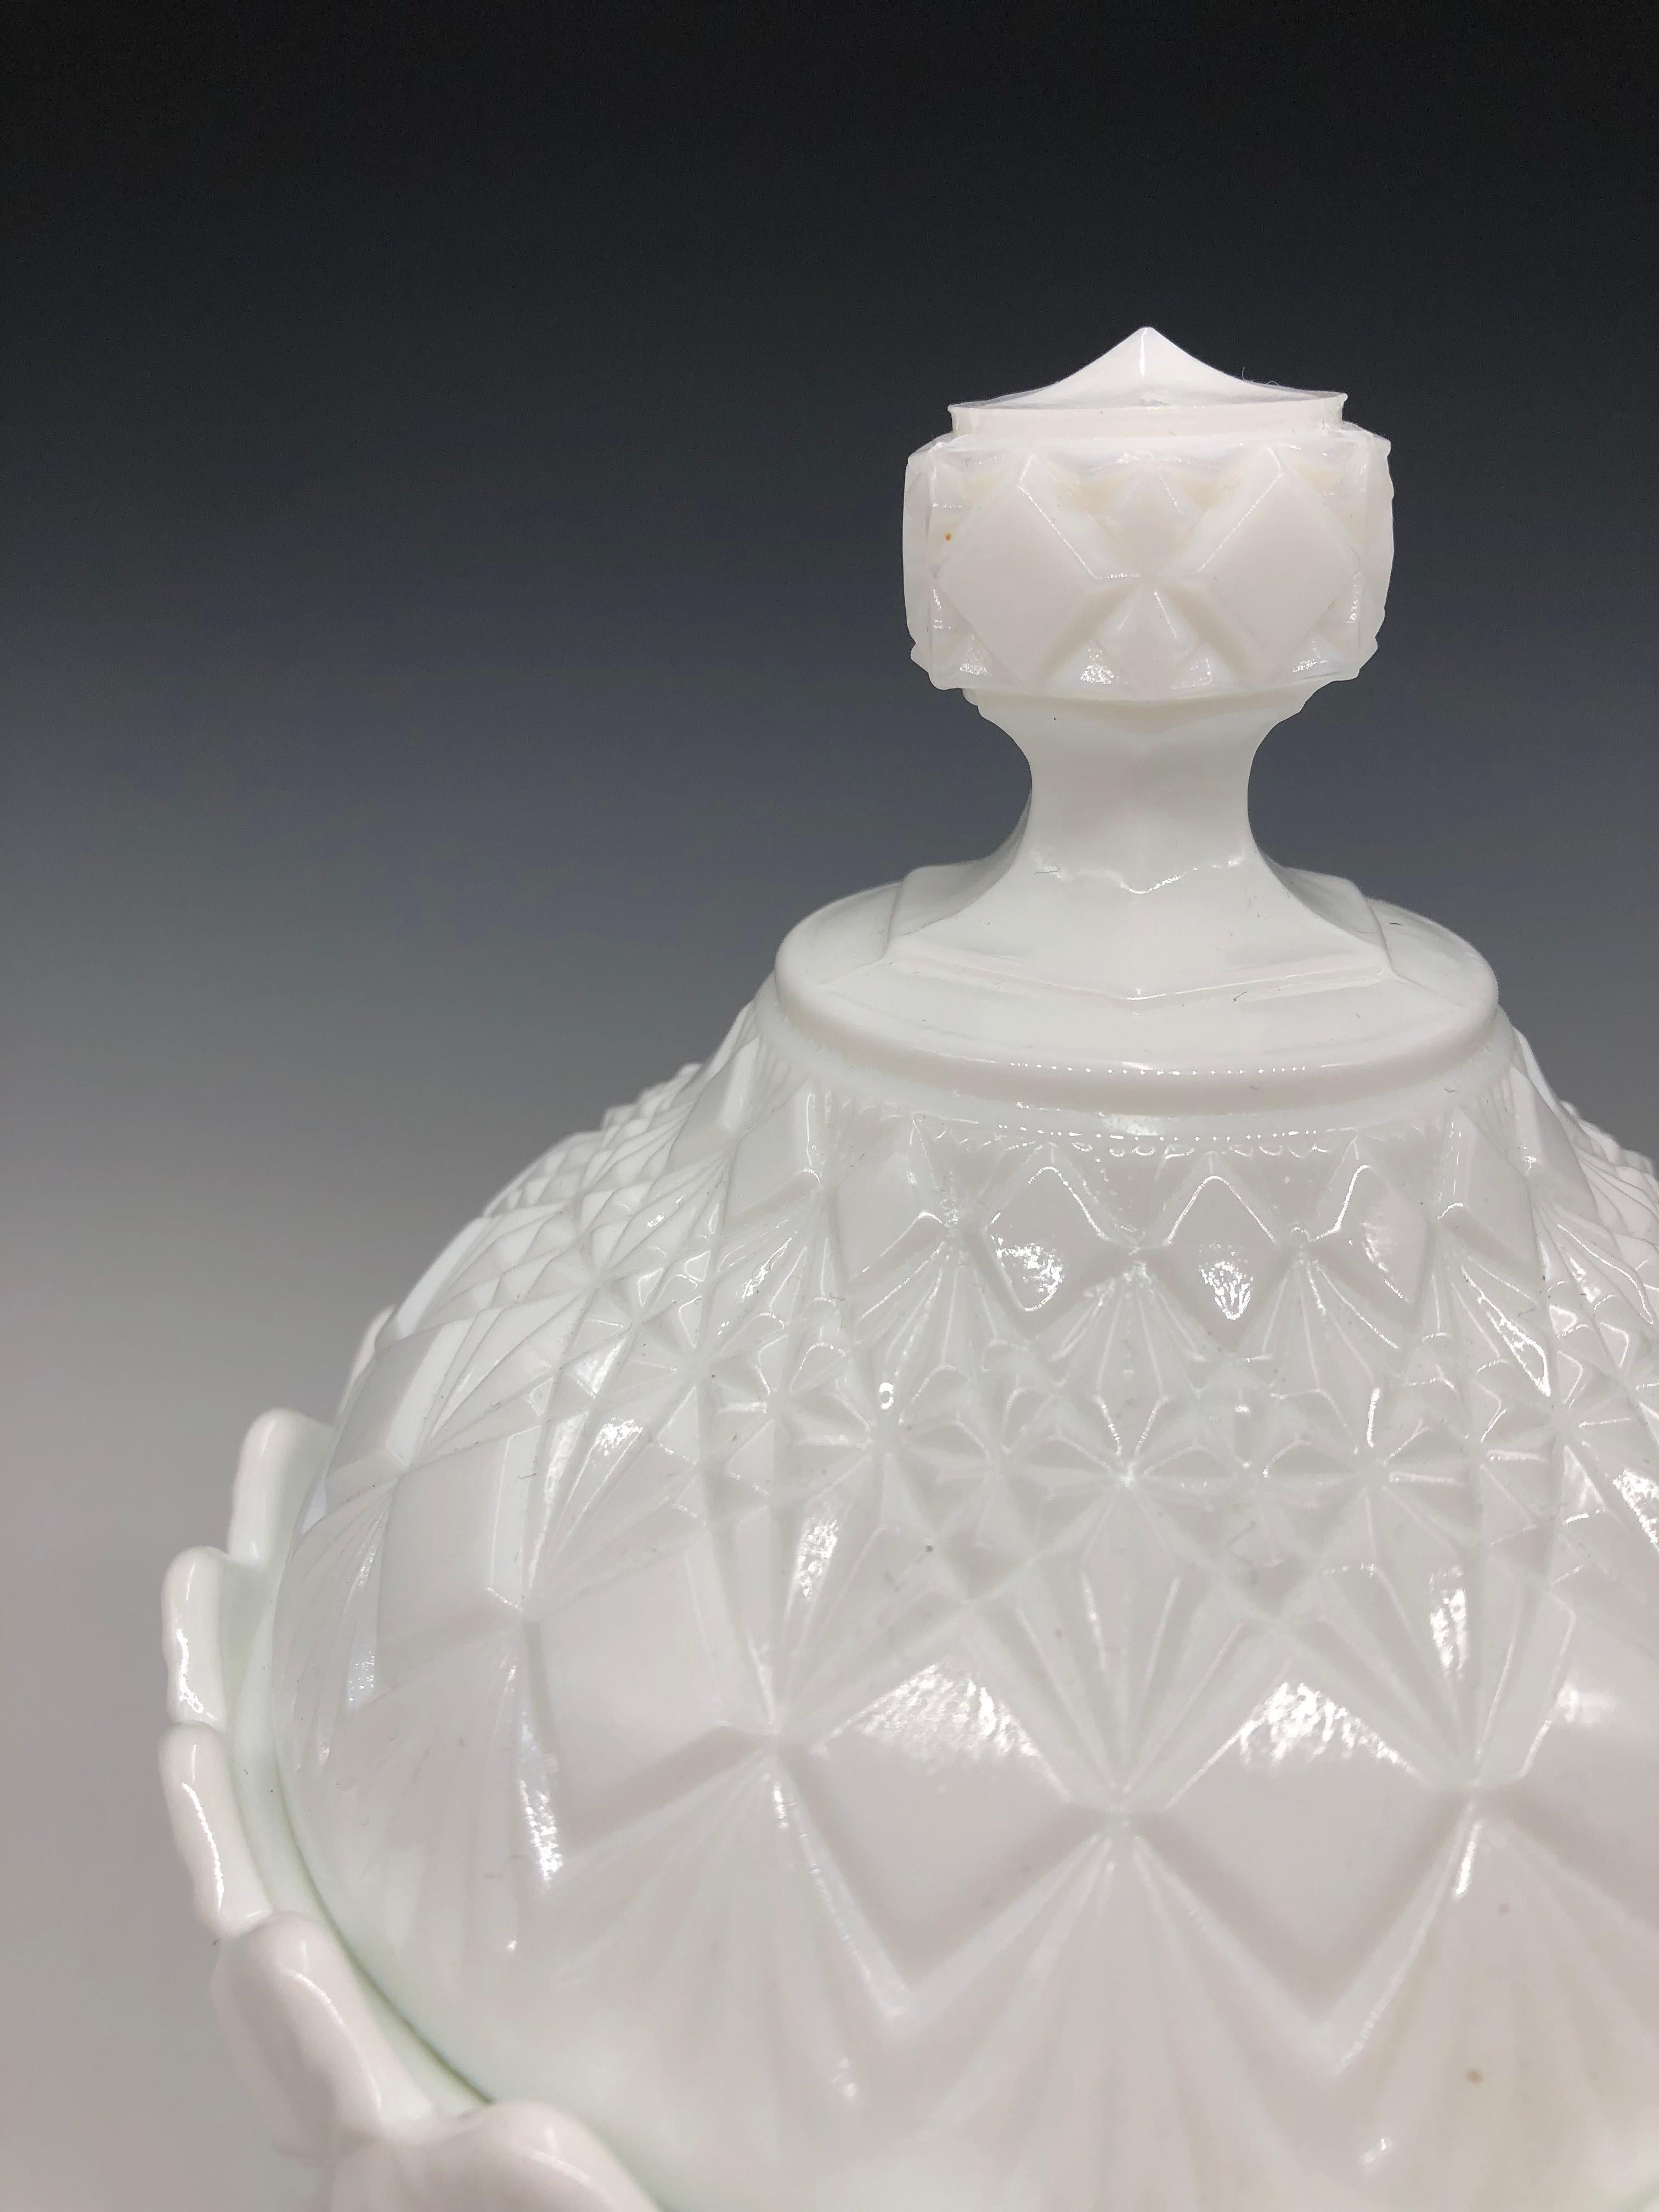 Mid-20th Century 1960s White Fenton Olde Virginia Glass Pedestal Candy Dish with Lid For Sale